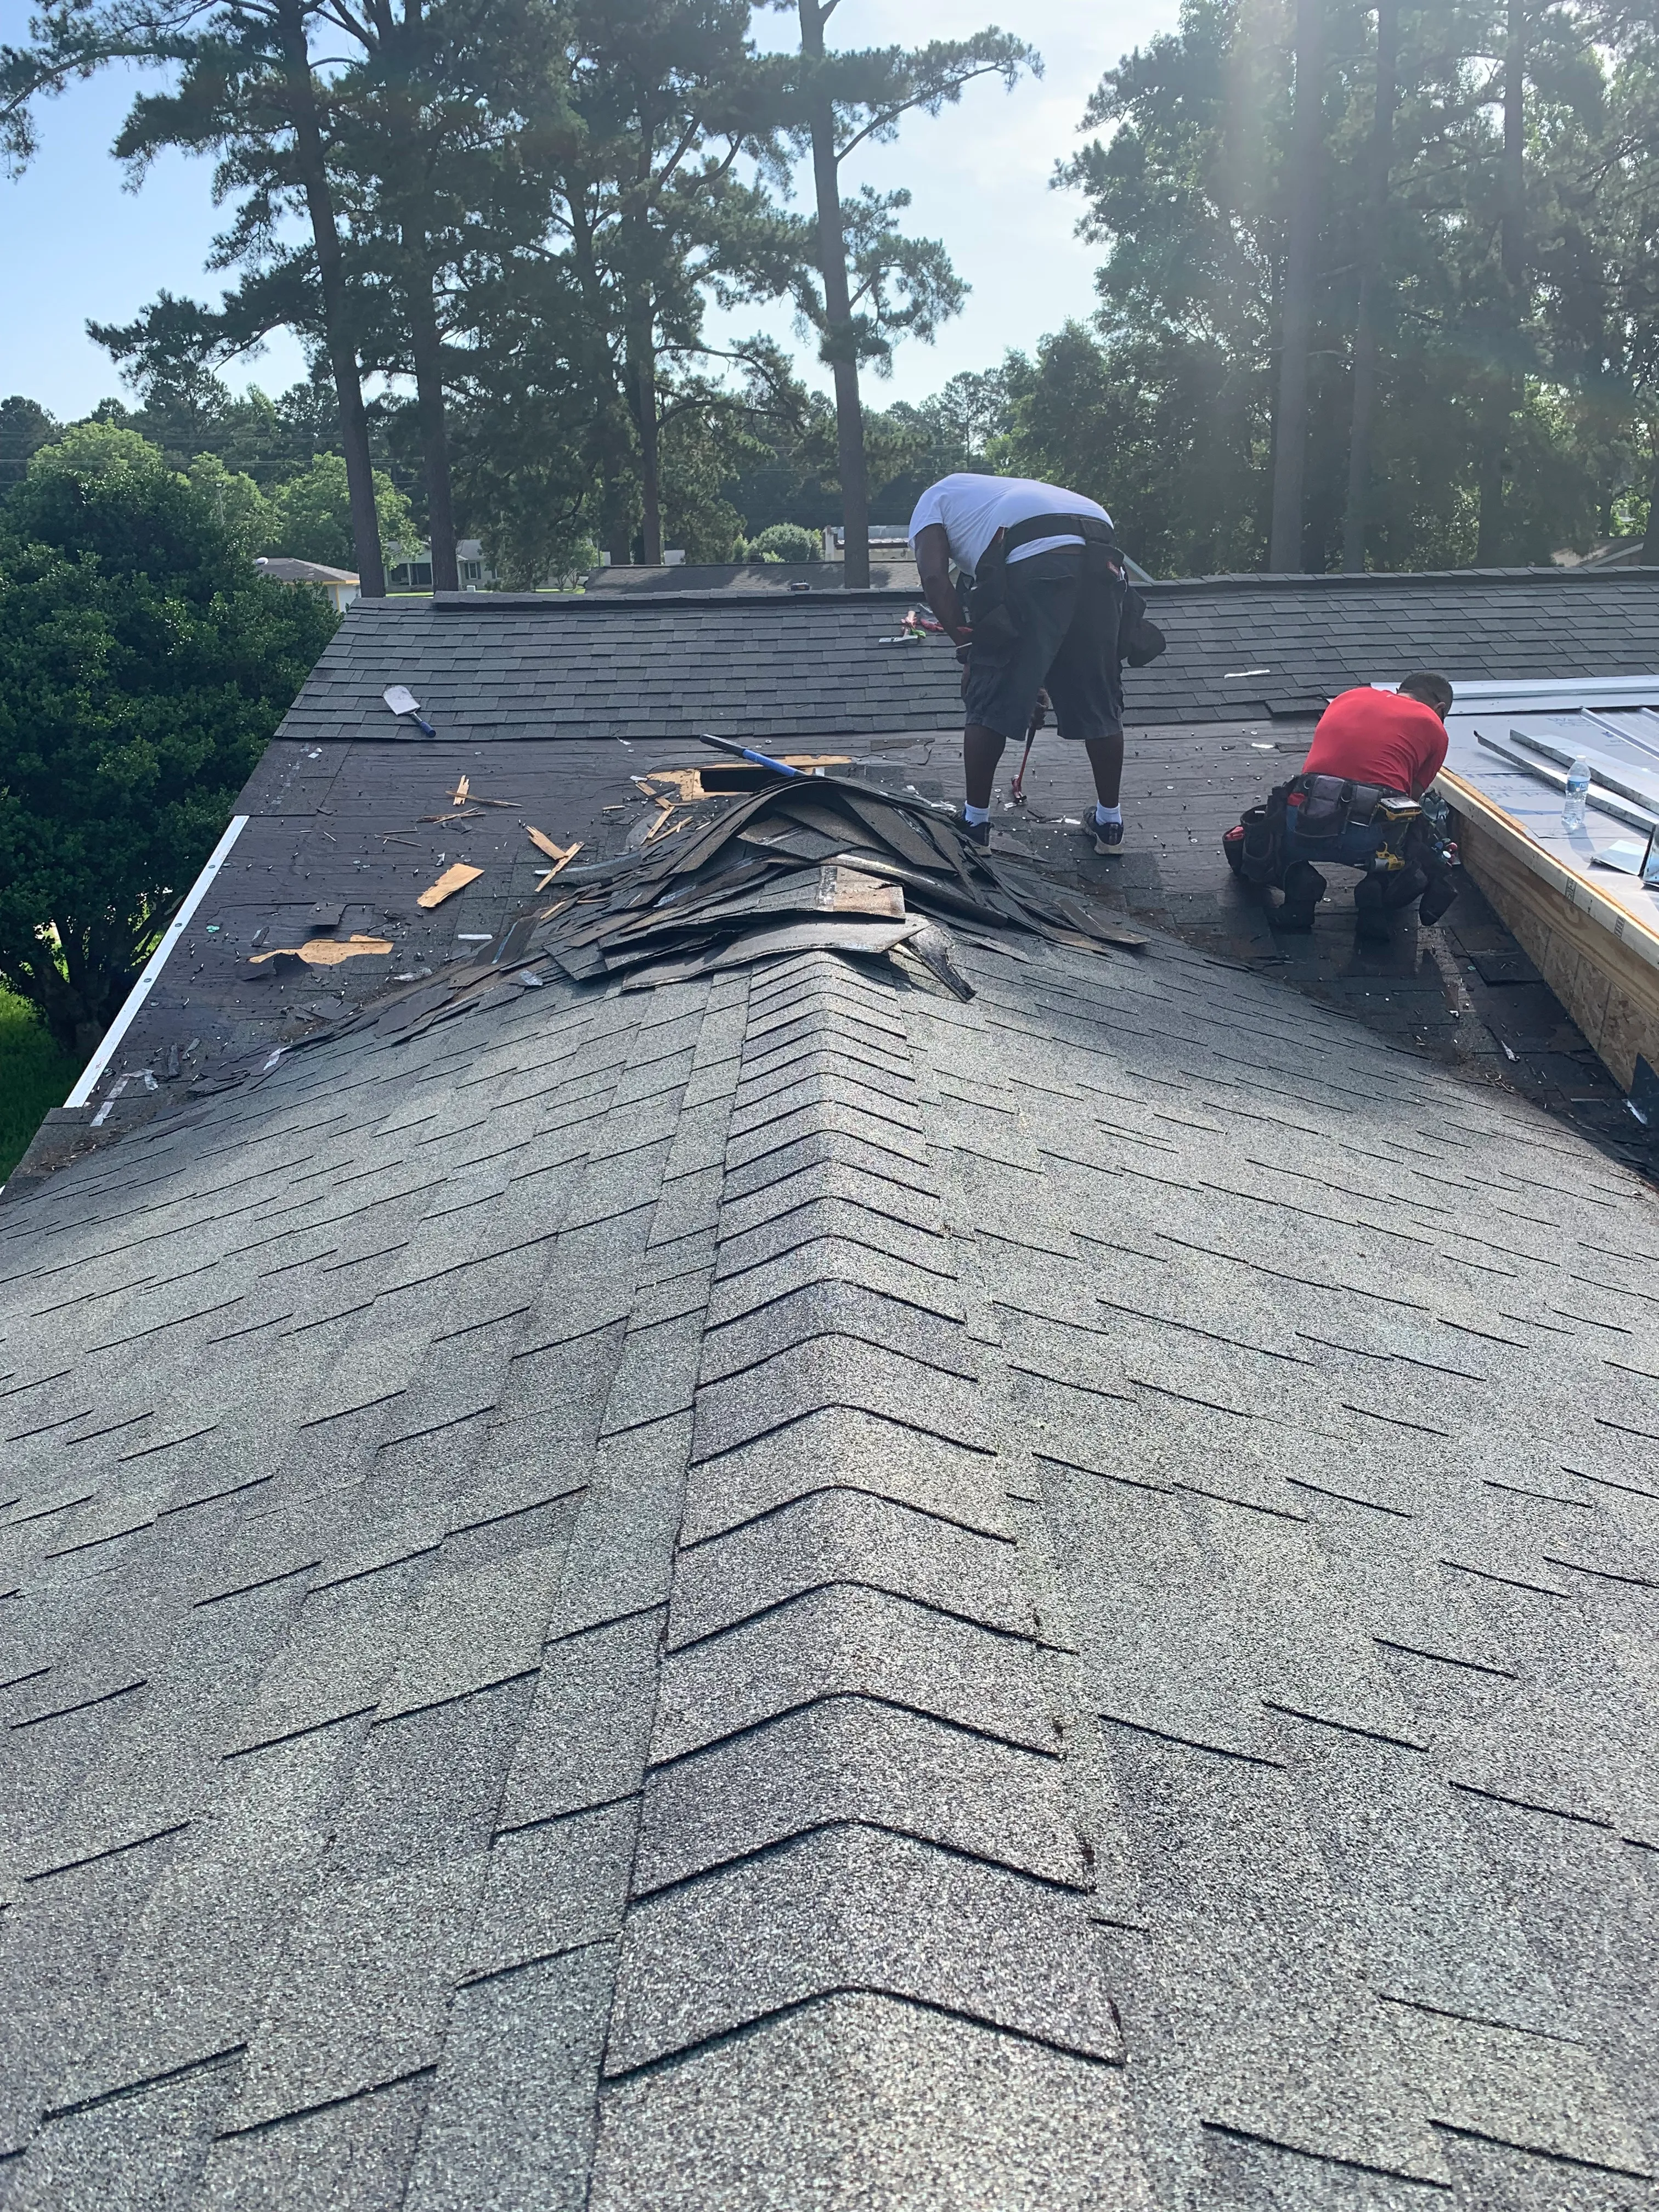 Roofing Installation for Safe Roofing Inc in Jacksonville, NC